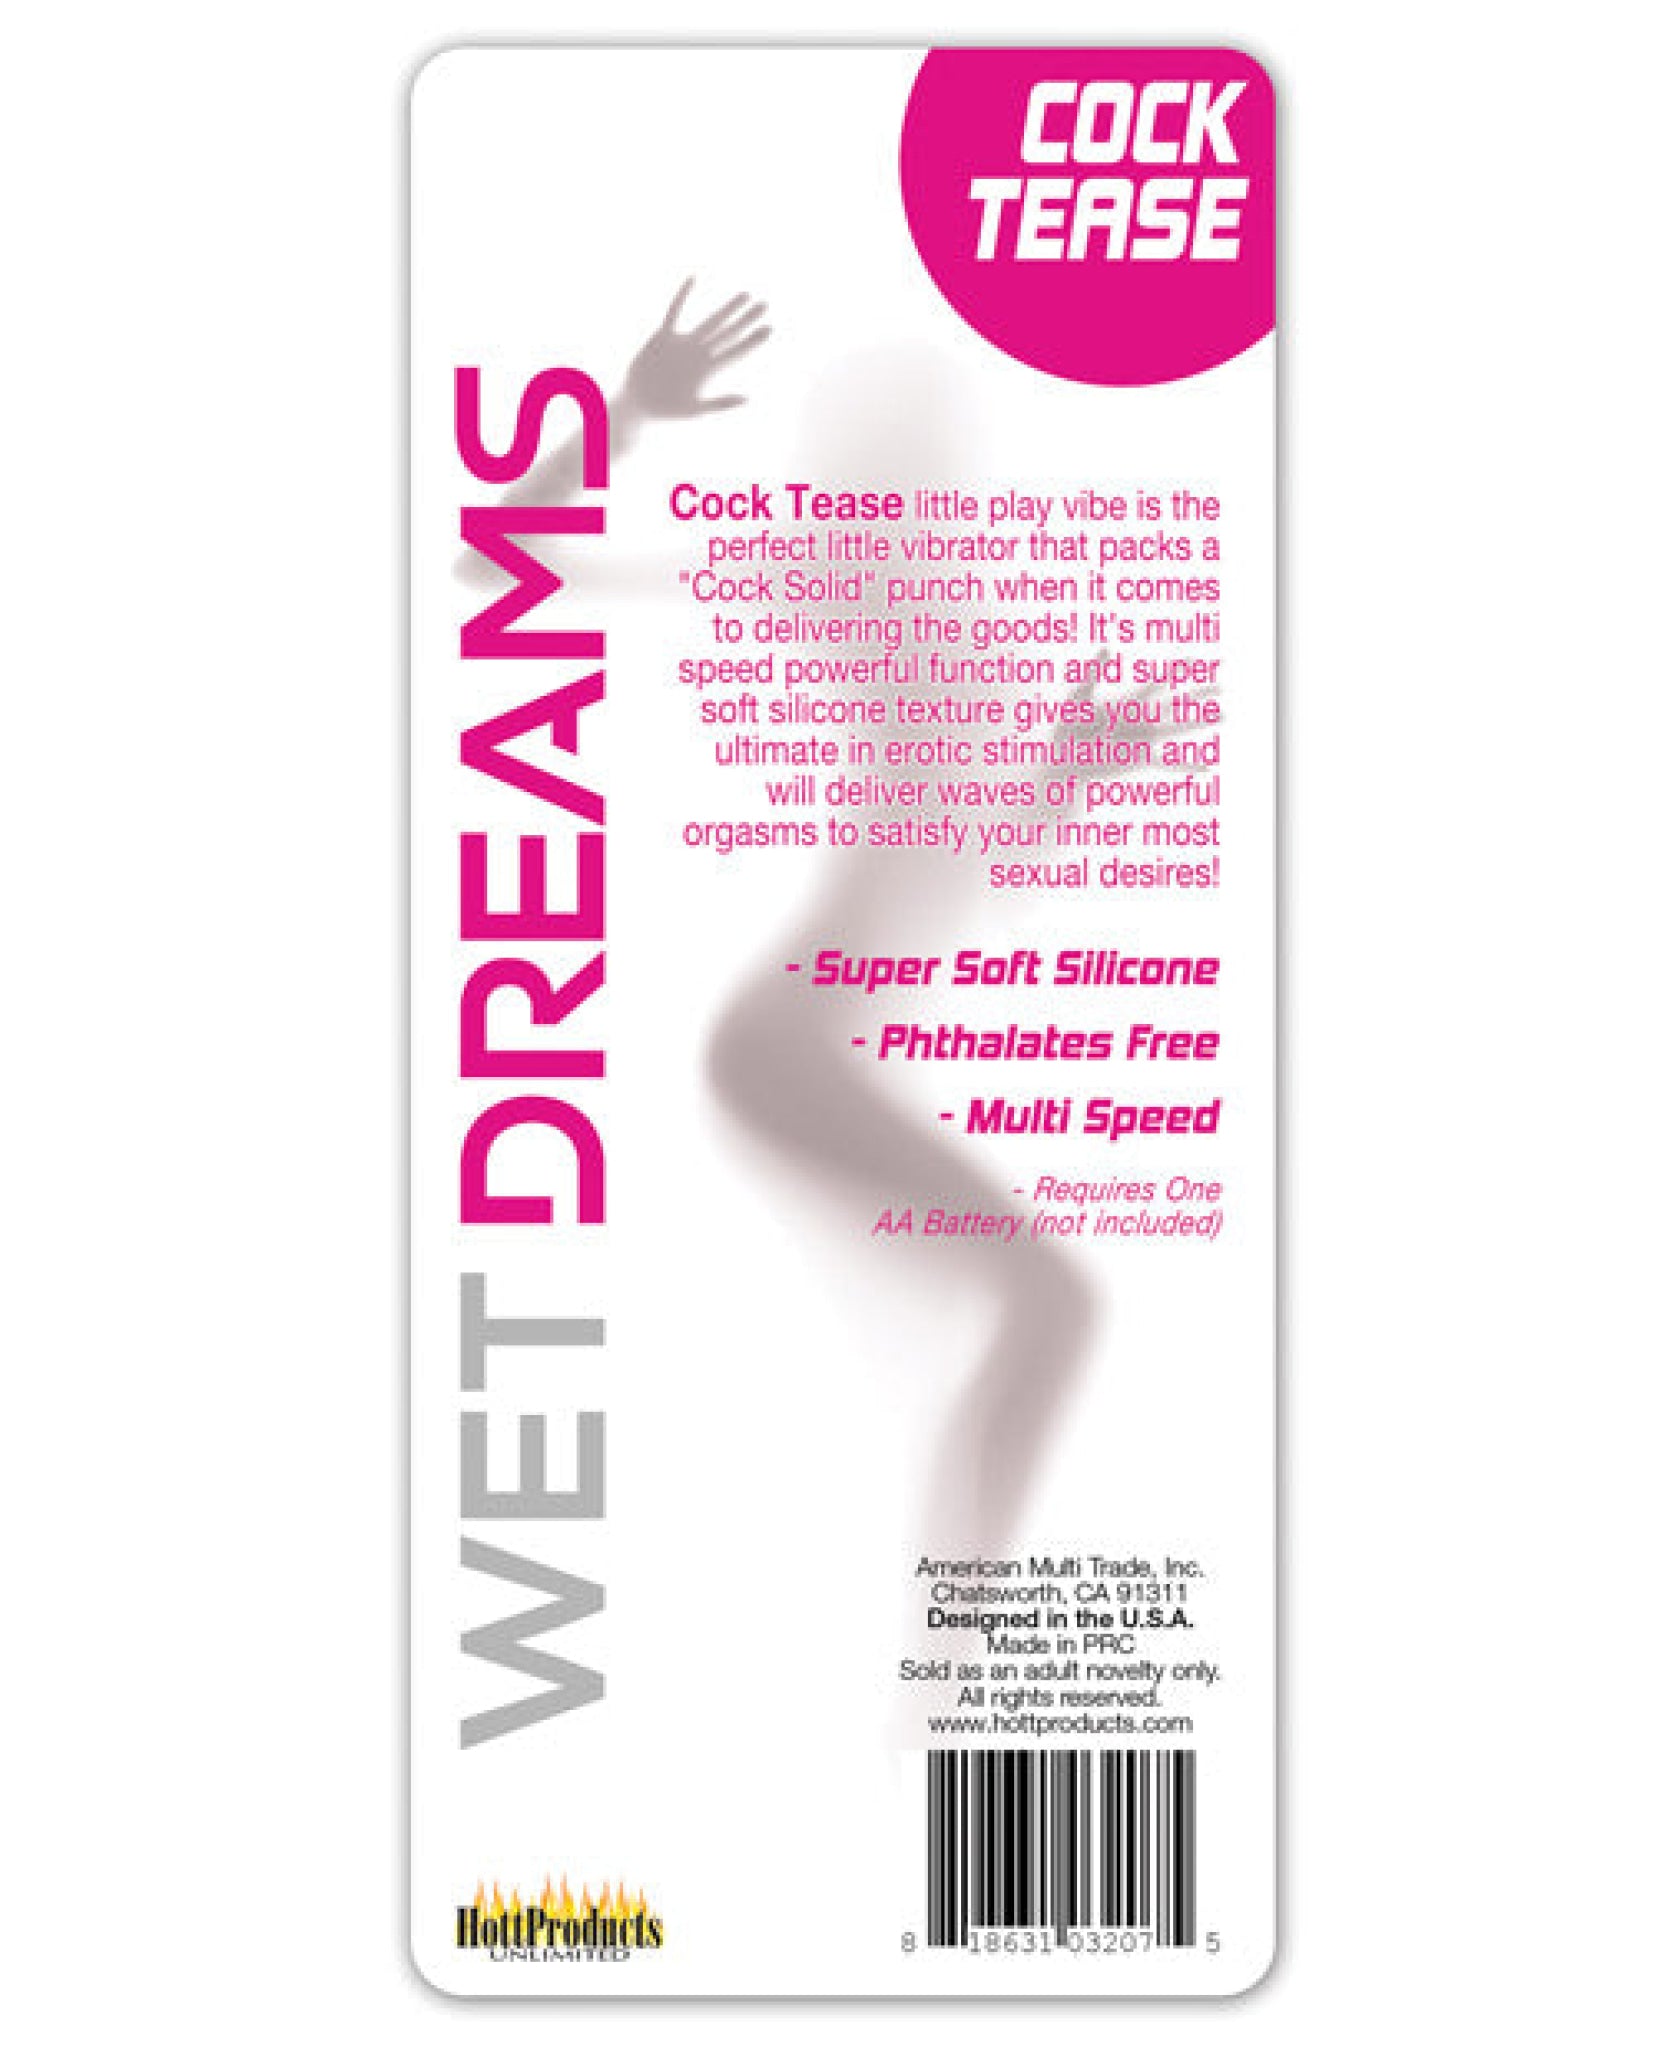 Wet Dreams Cock Tease Play Vibe - Magenta Hott Products